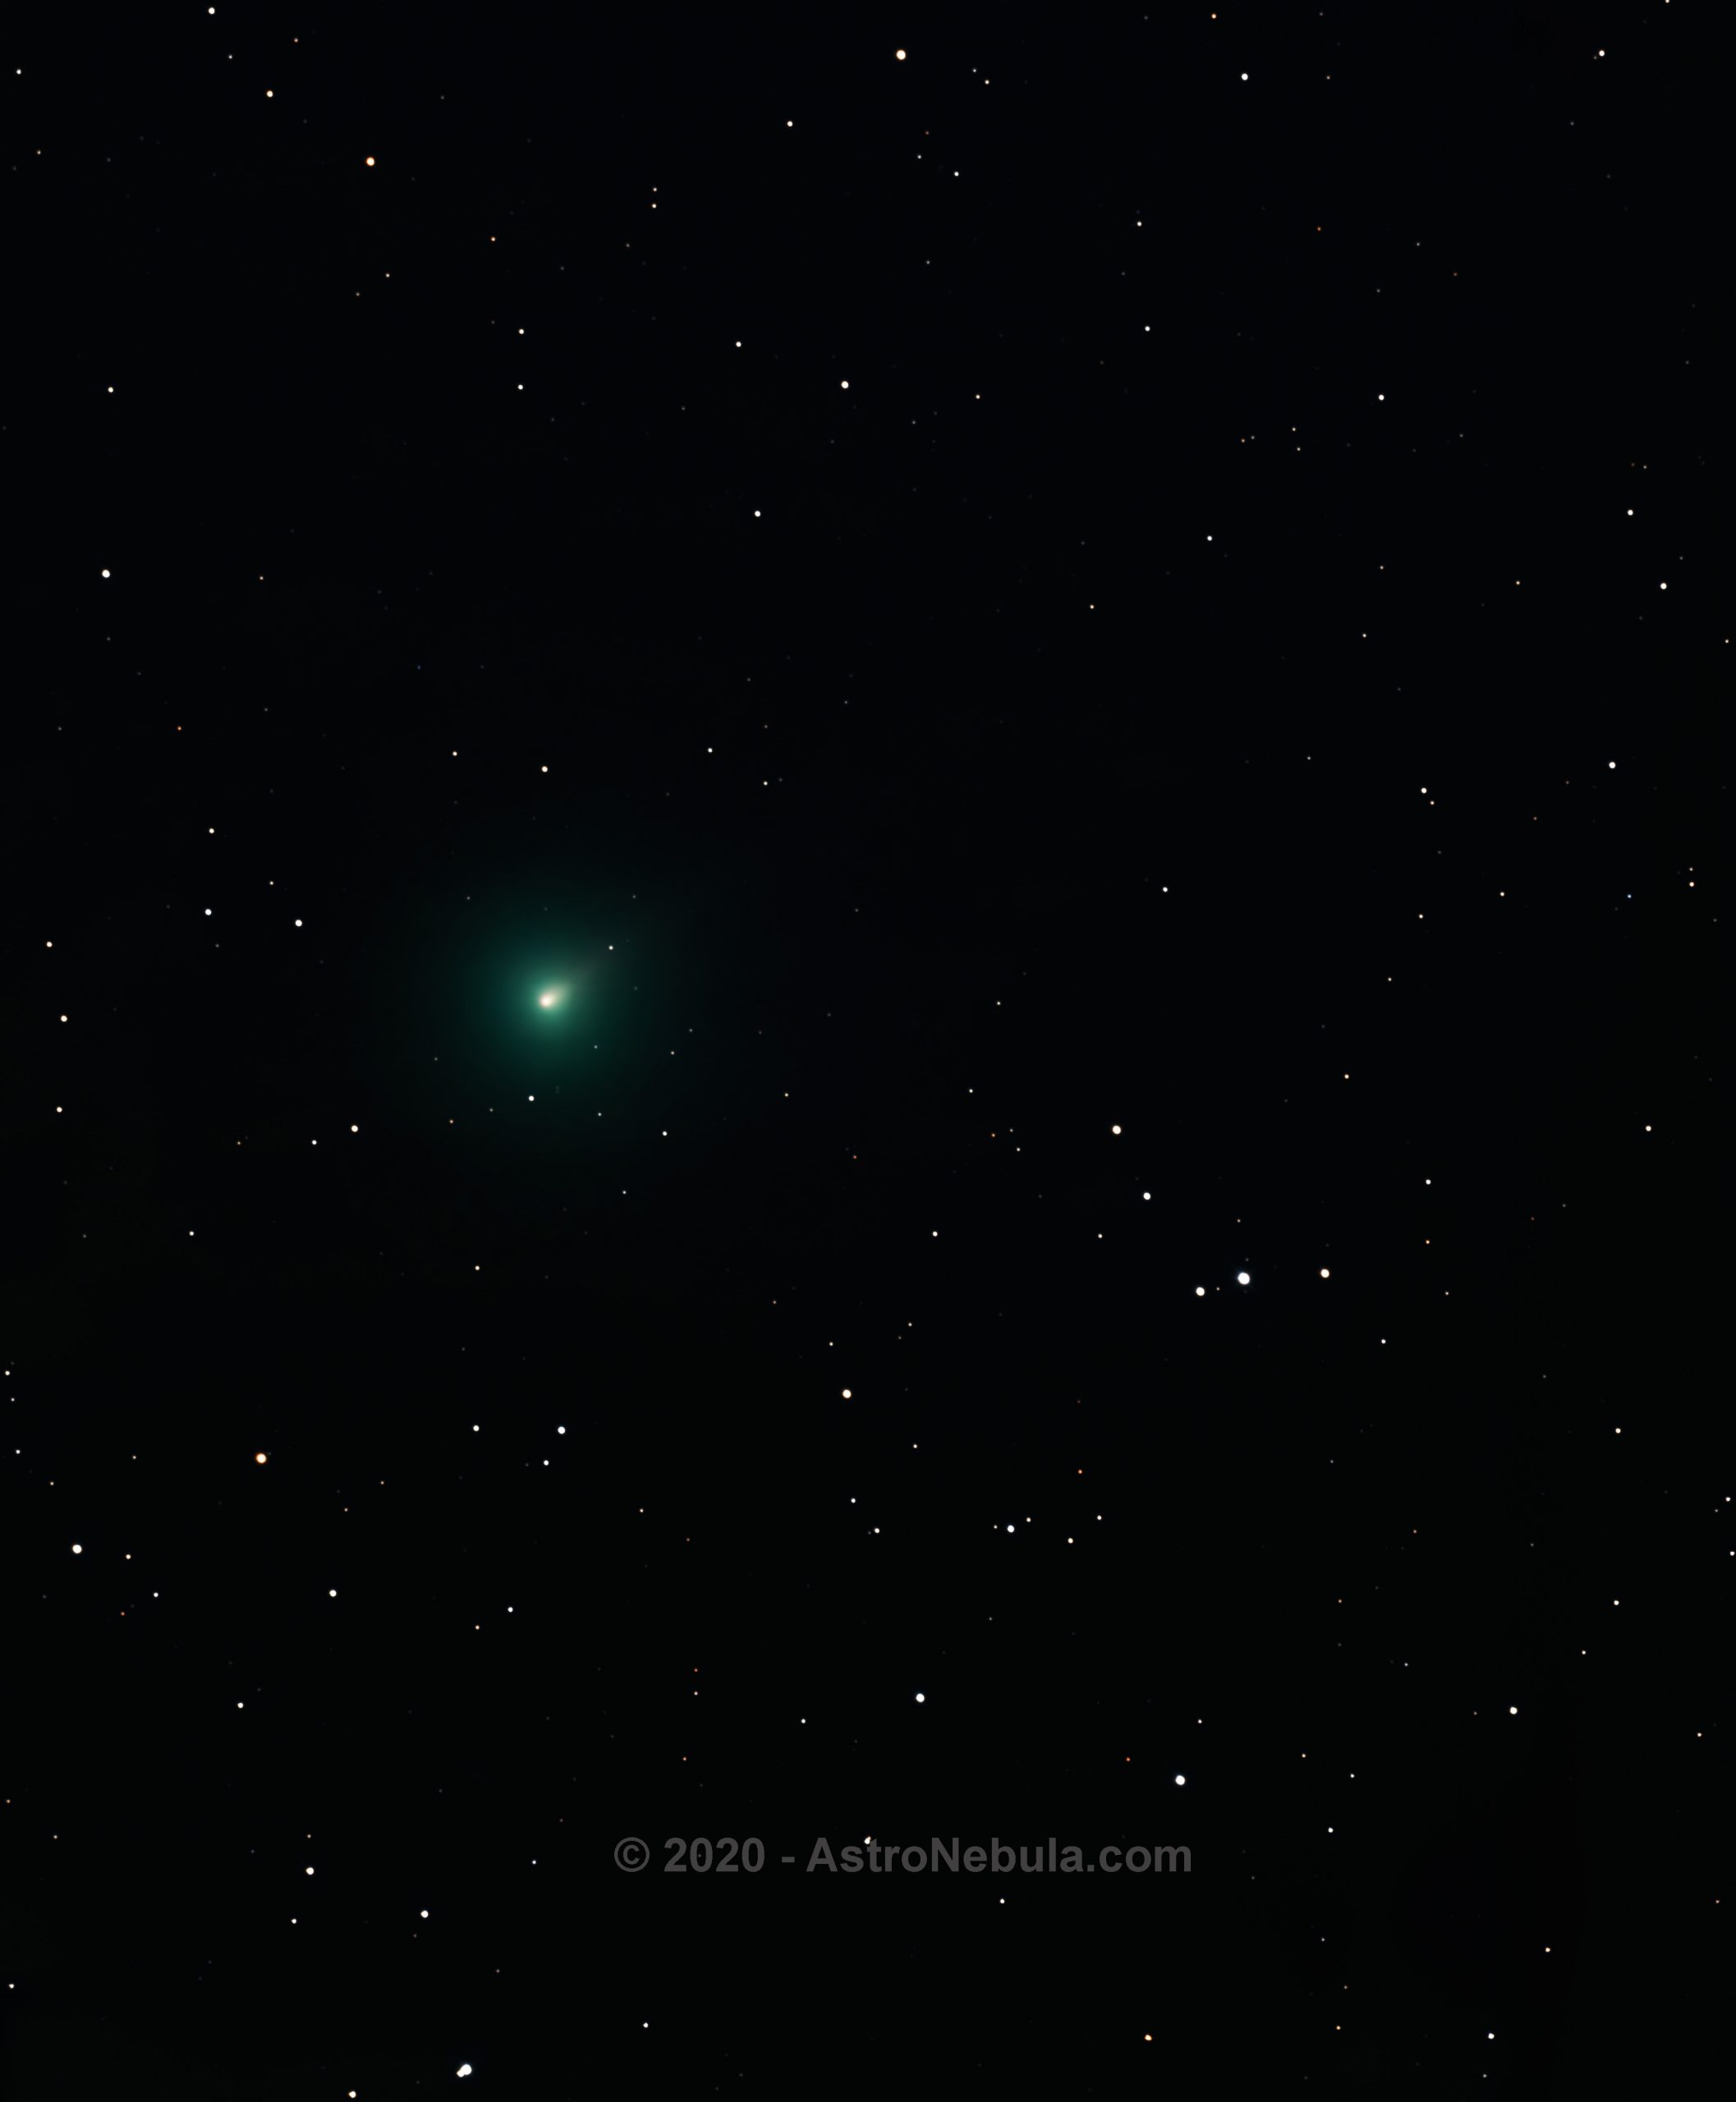 Comet Atlas C/2019-Y4 Imaged on March 25th 2020 by Astronebula.com